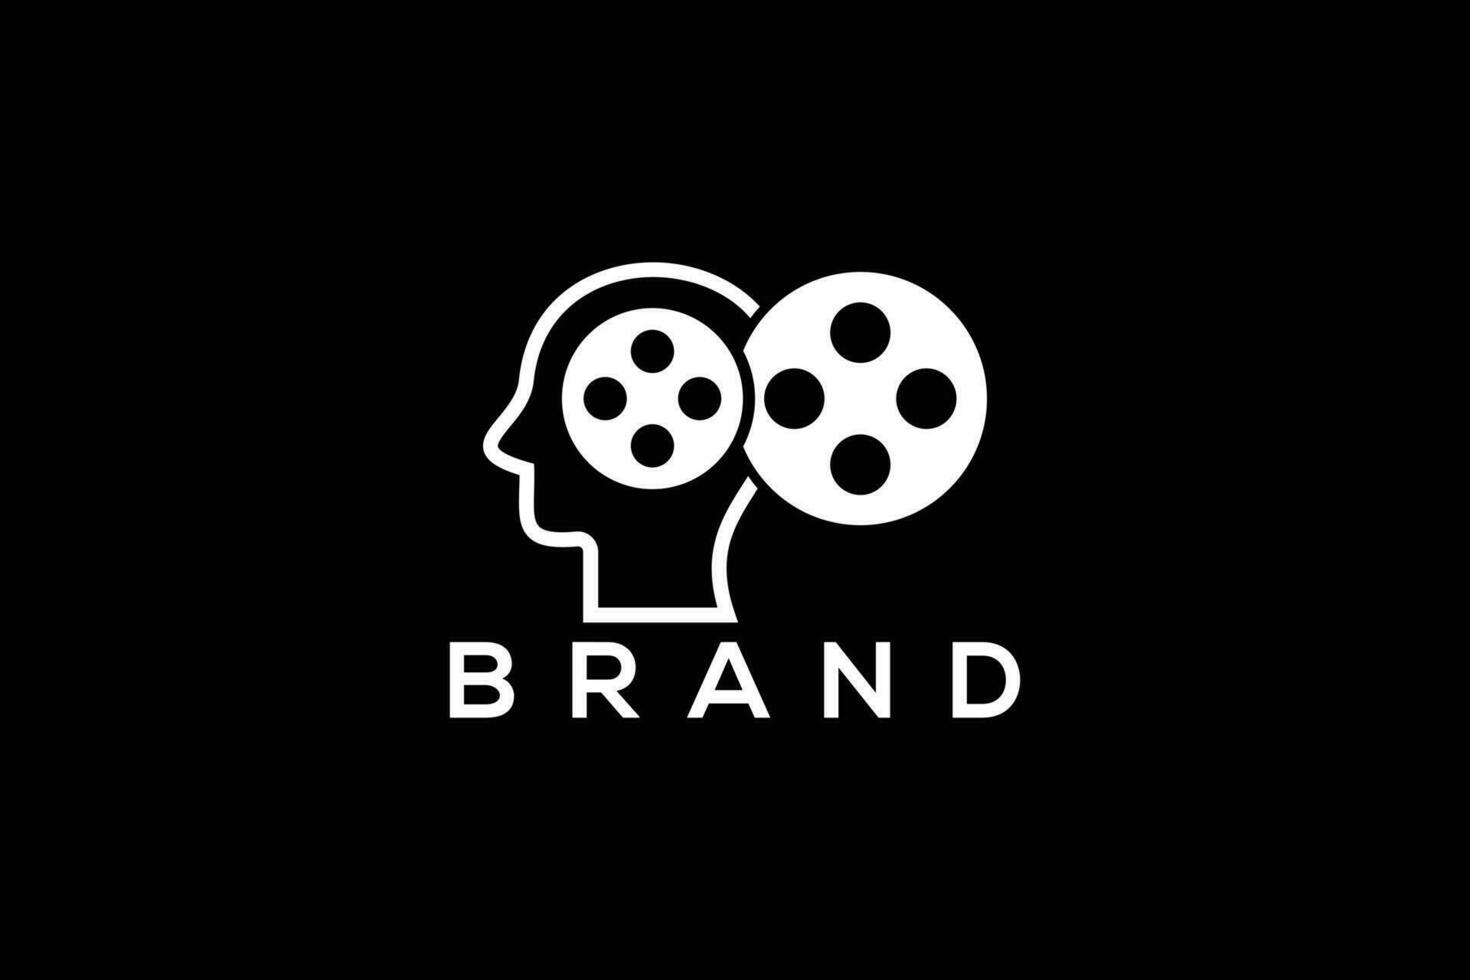 Trendy and minimal knowledge and film and television production vector logo design